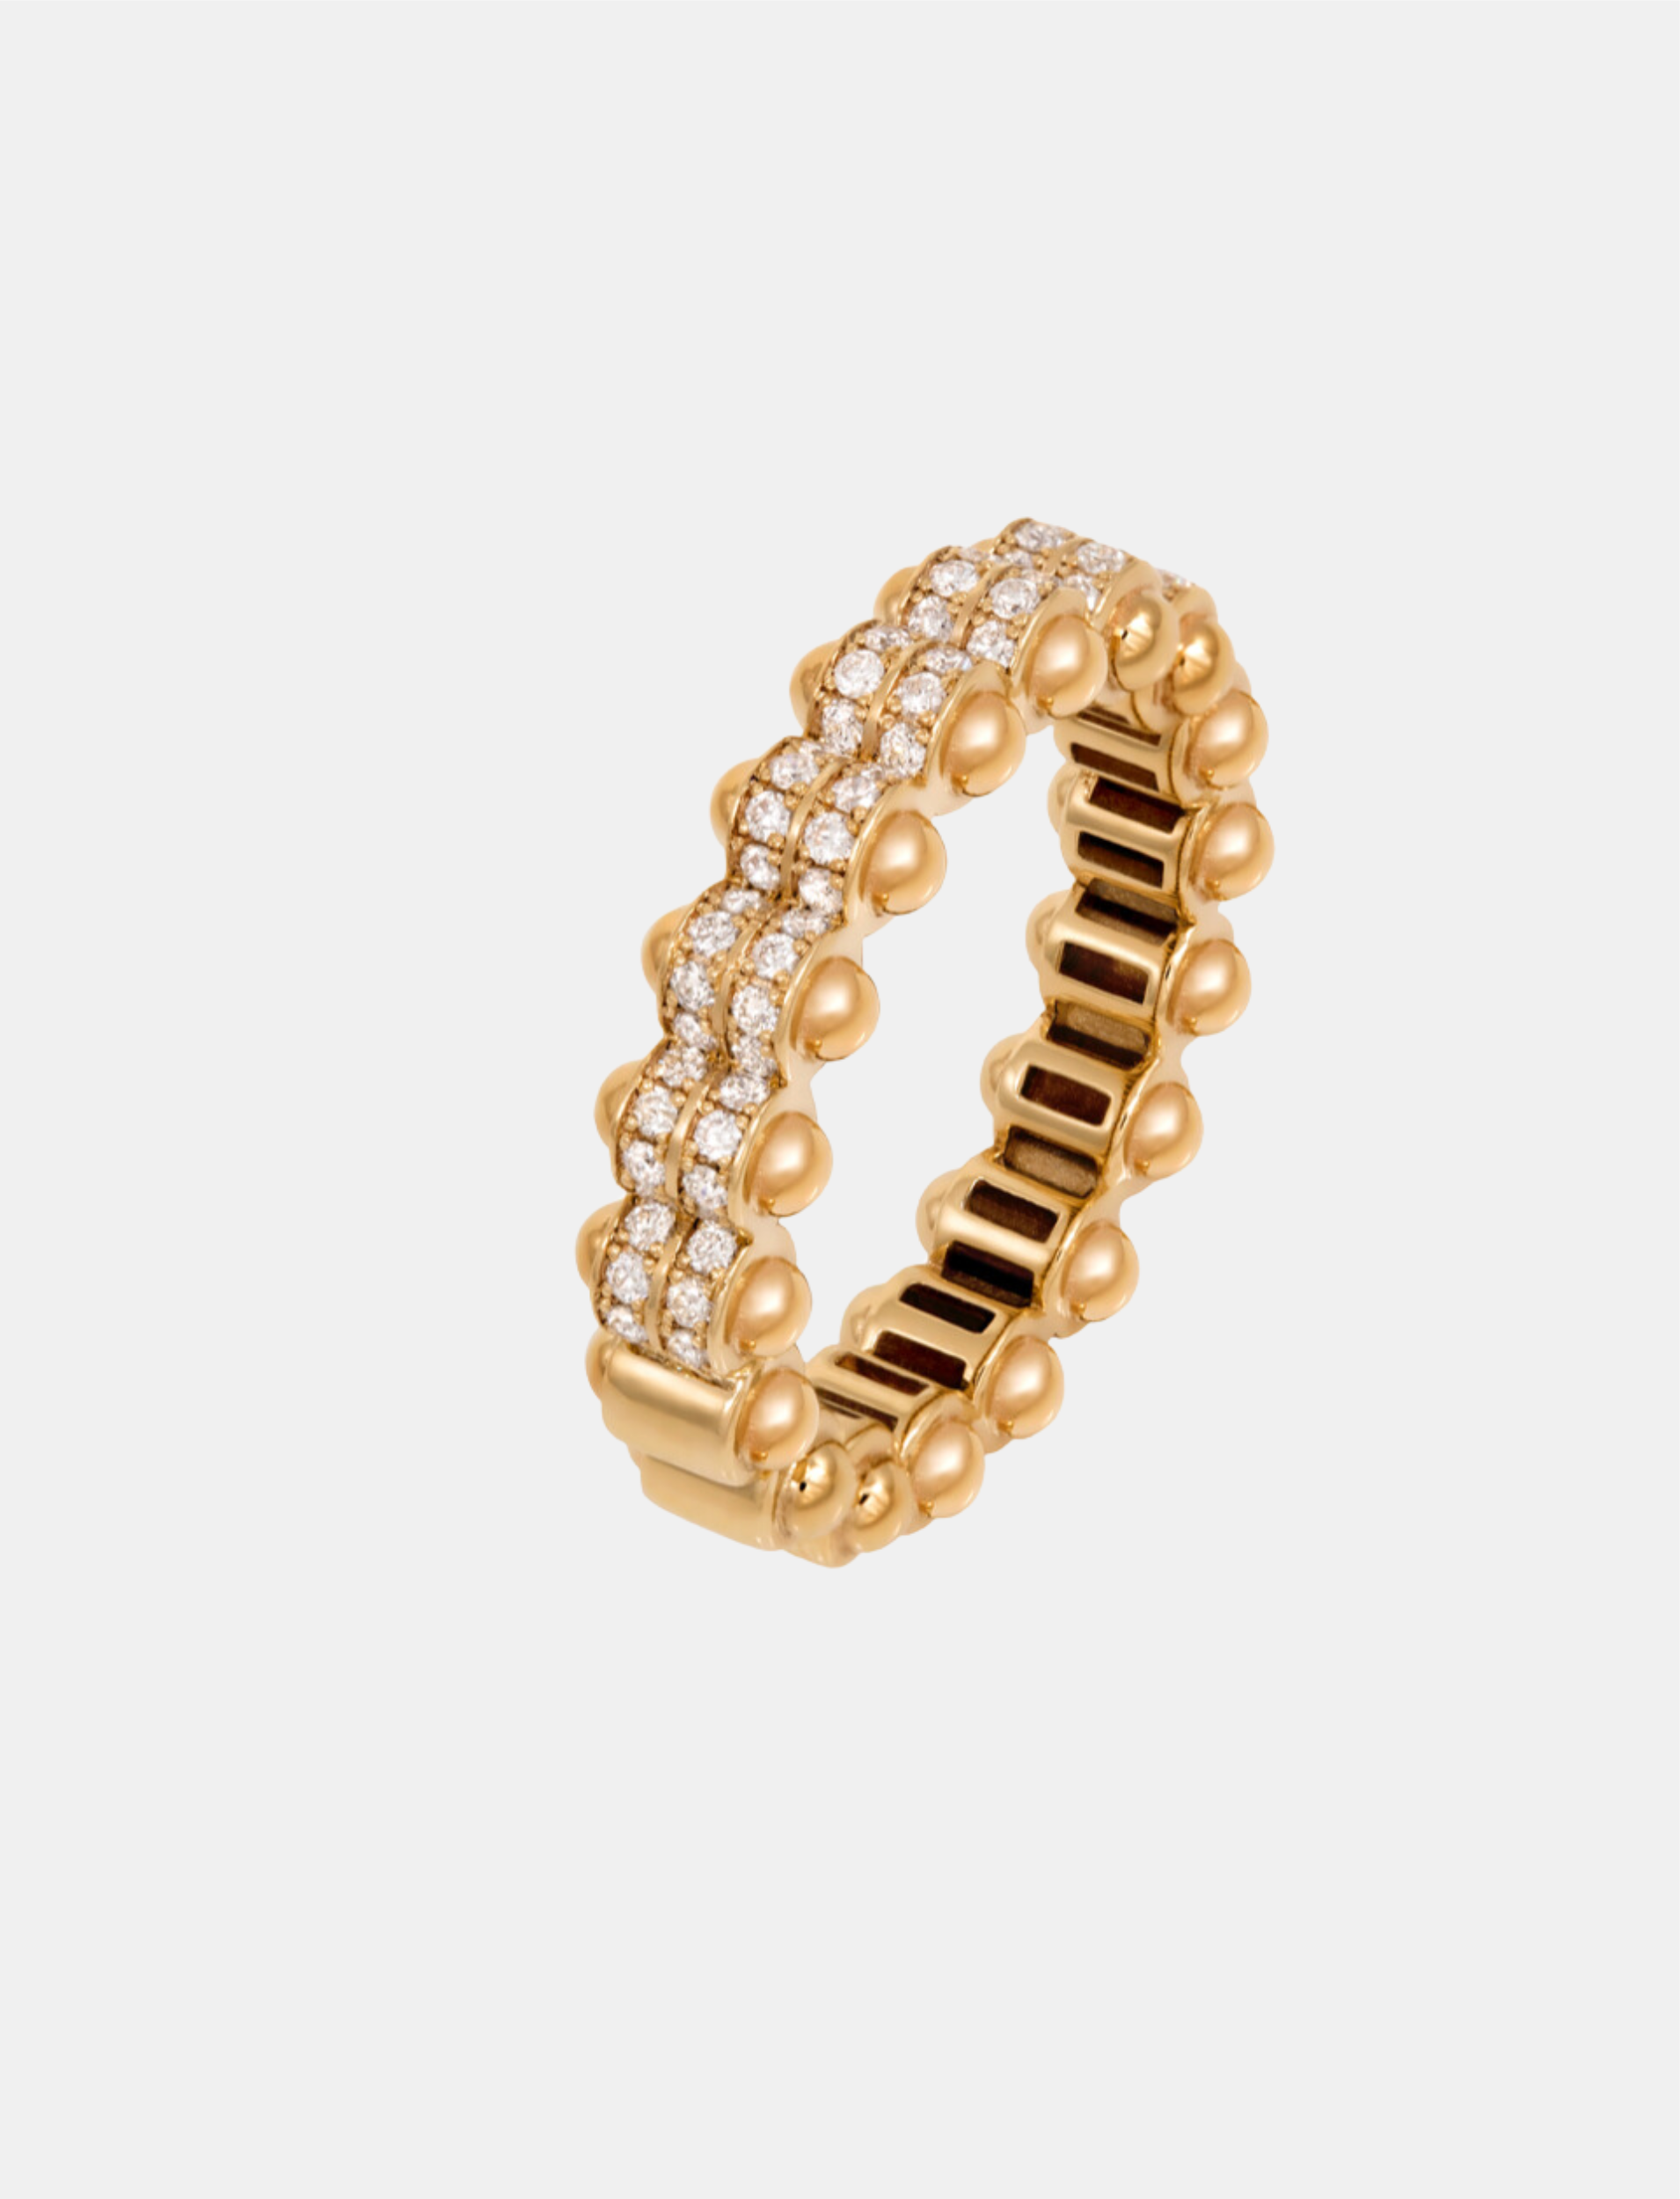 The Gold Atom Ring - Size 2